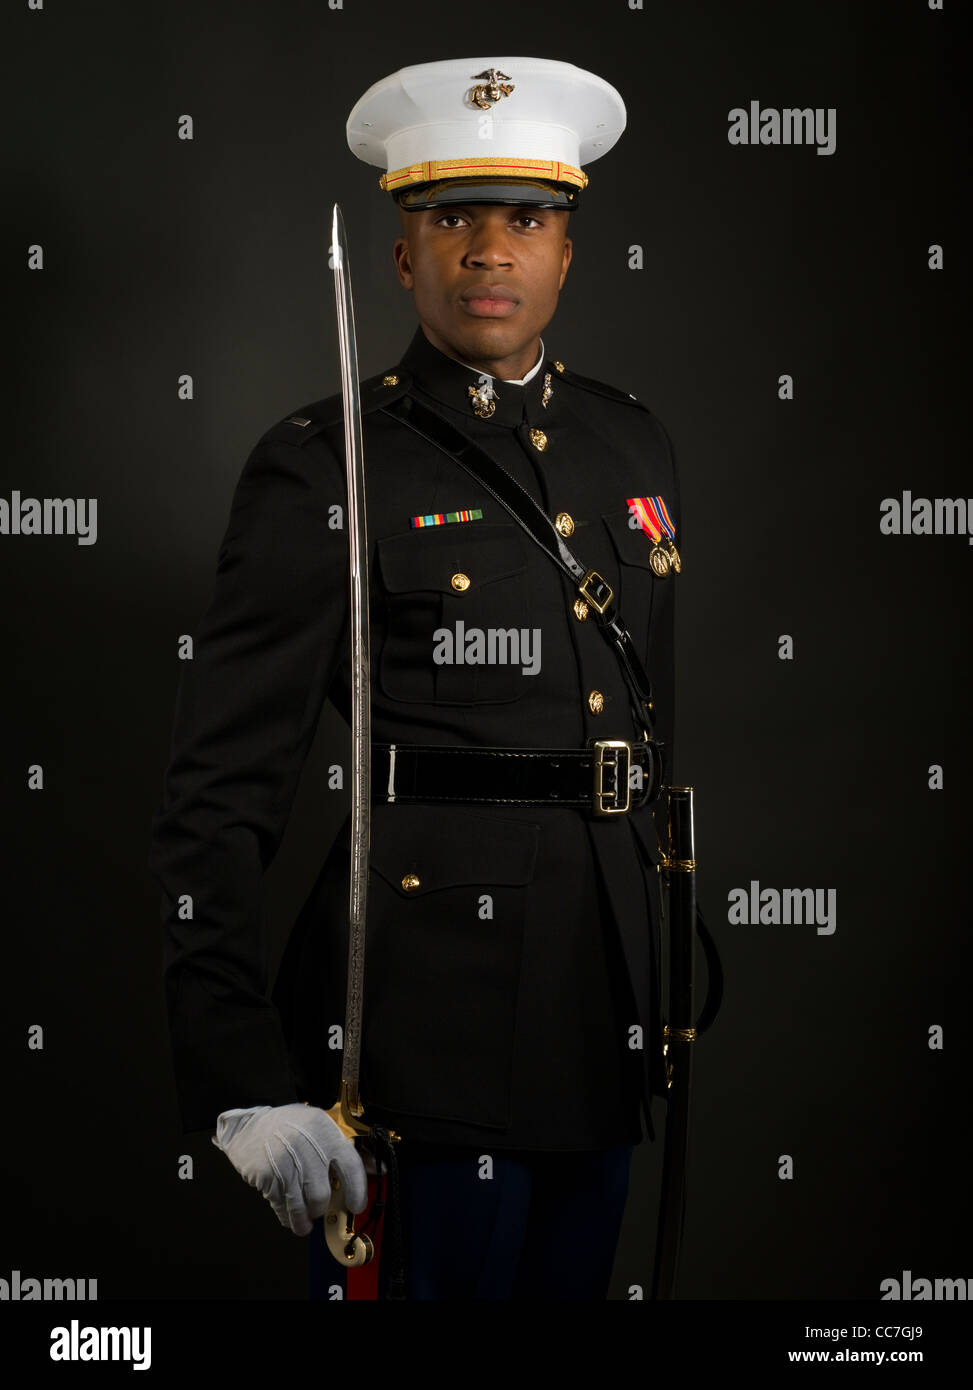 United States Marine Corps Officer In Blue Dress A